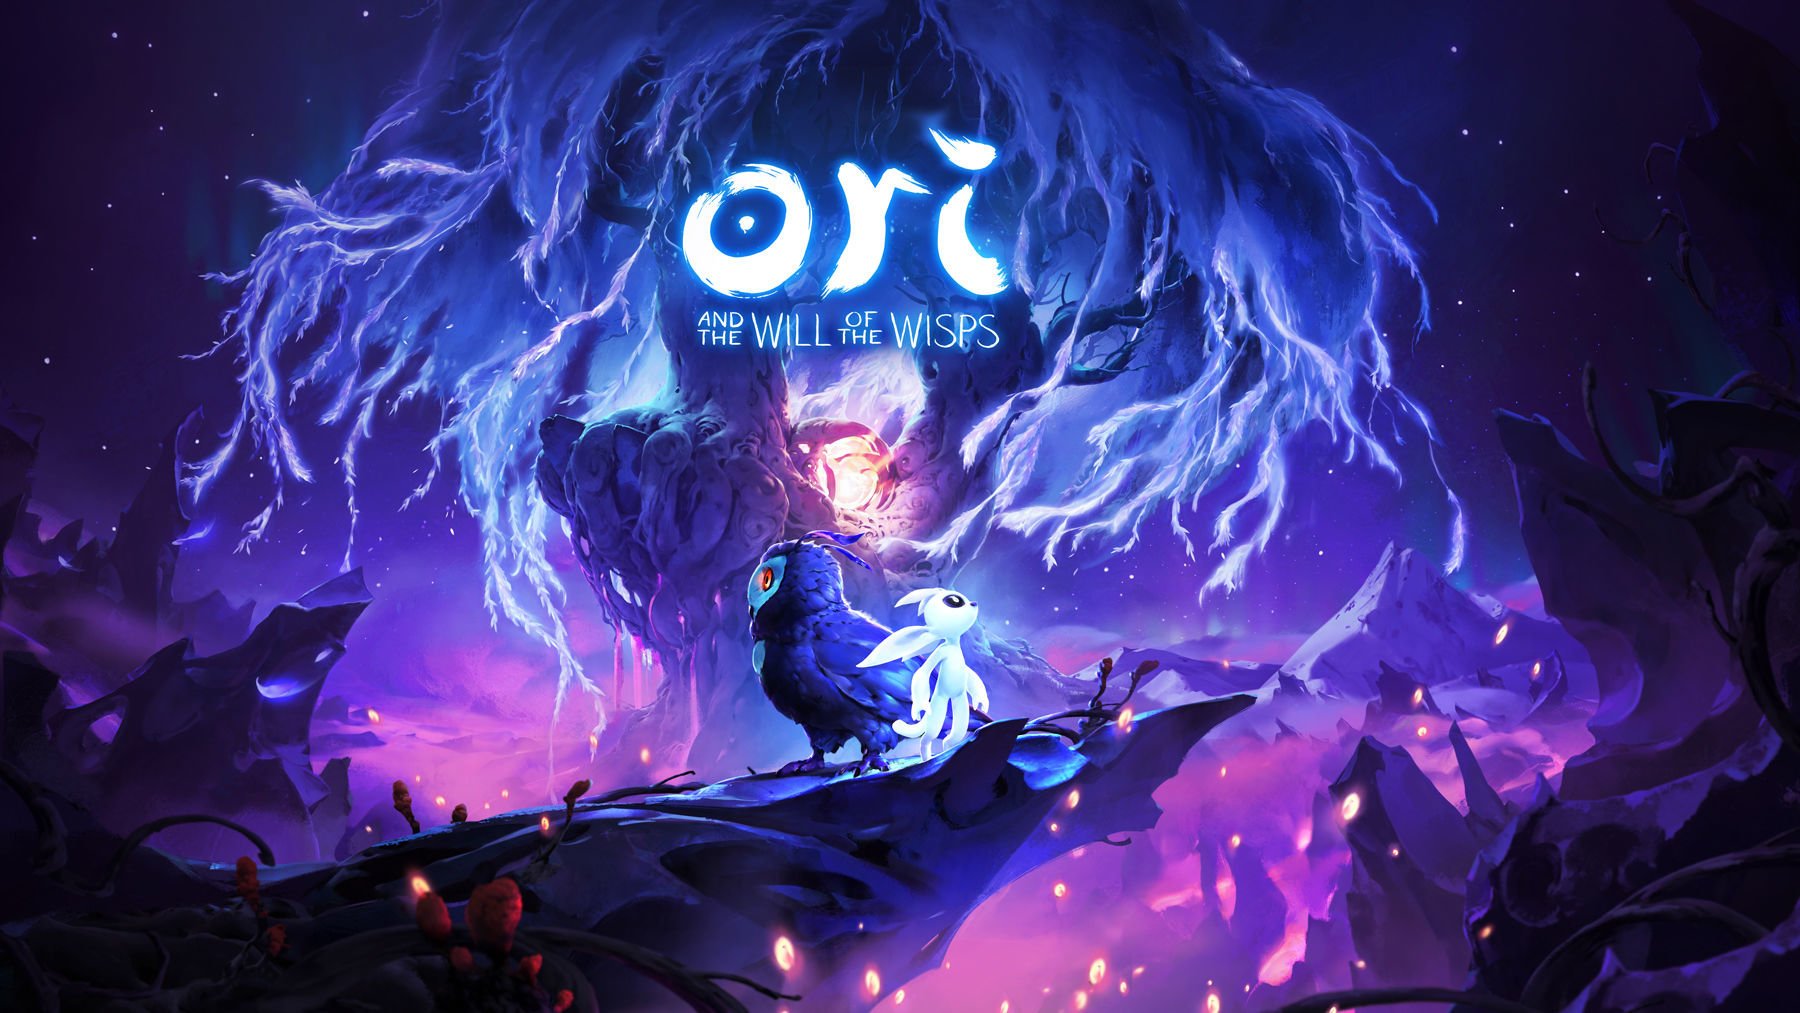 Ori and the will of the wisps na bgs 2019 | dims 2 | kaze and the wild masks | ori and the will of the wisps kaze and the wild masks